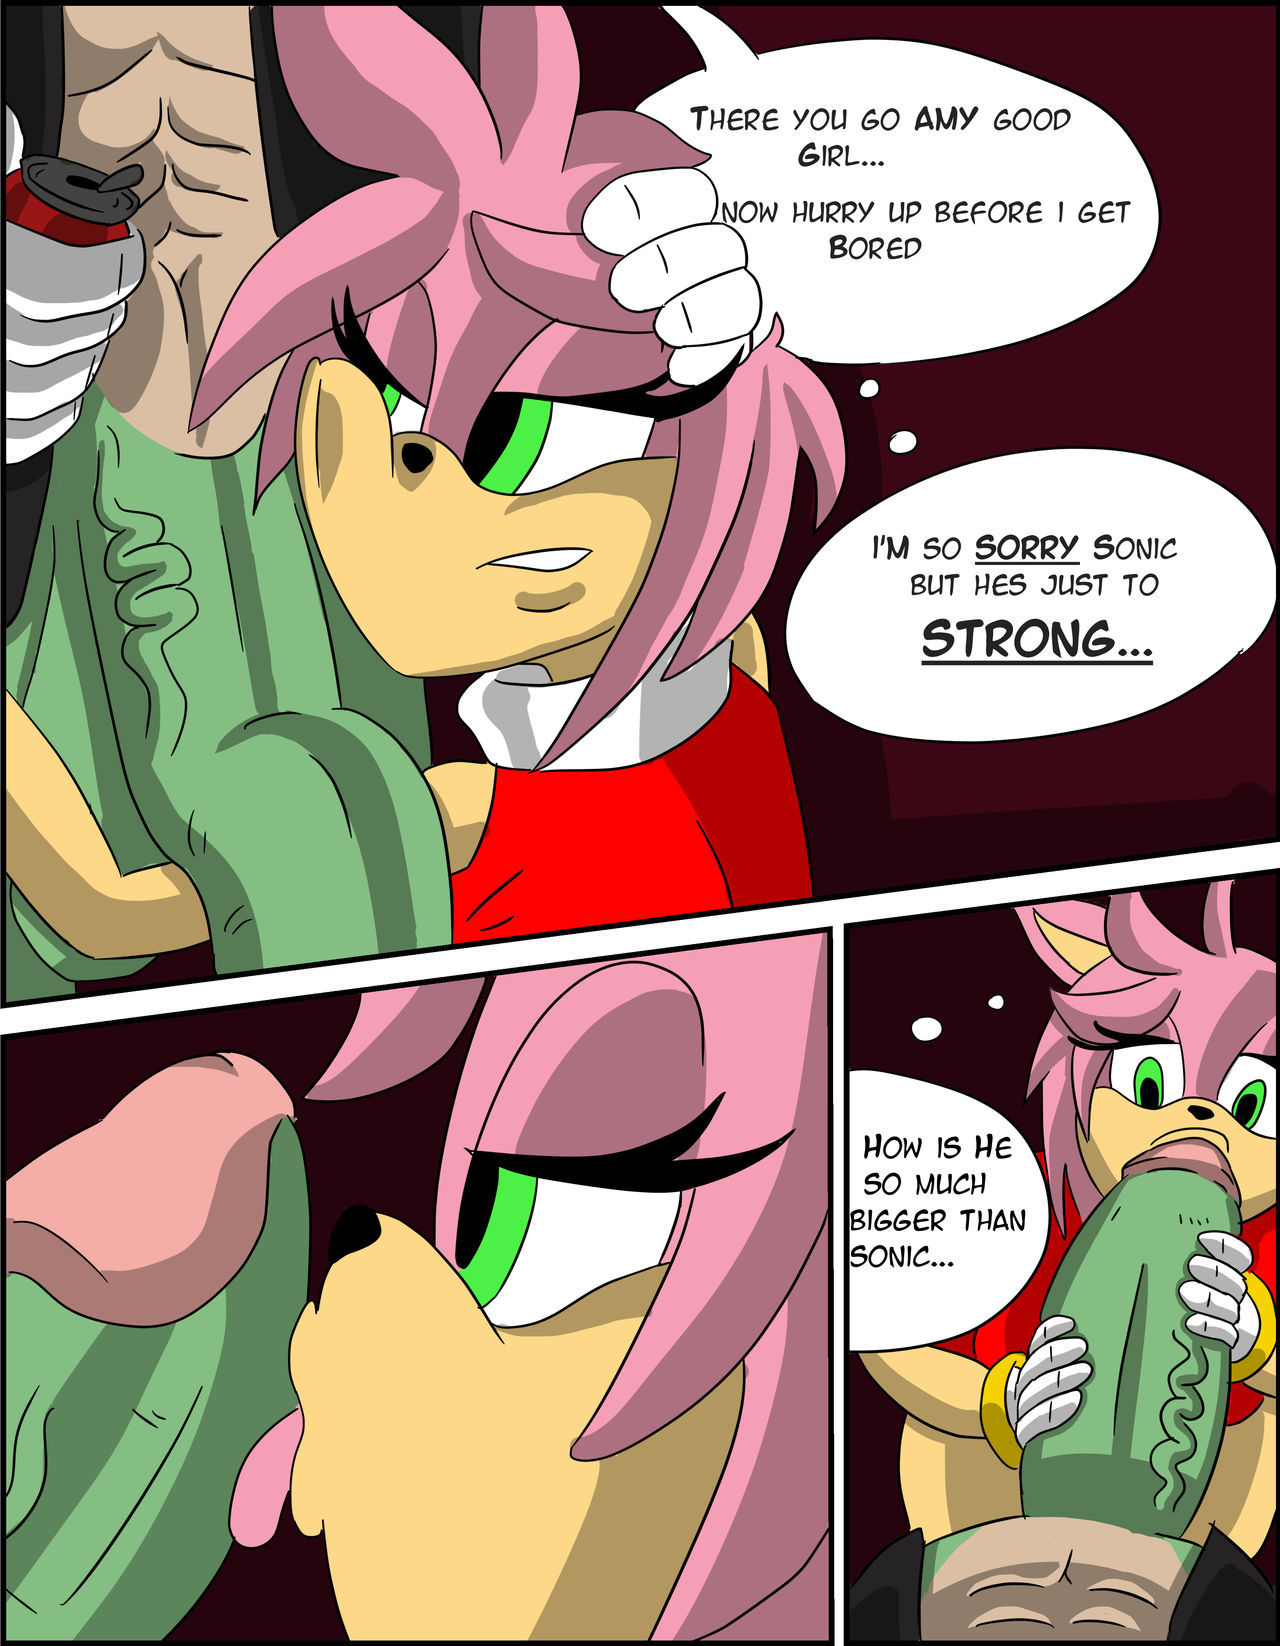 Amys Peril Sonic The Hedgehog by Loonyjams page 3